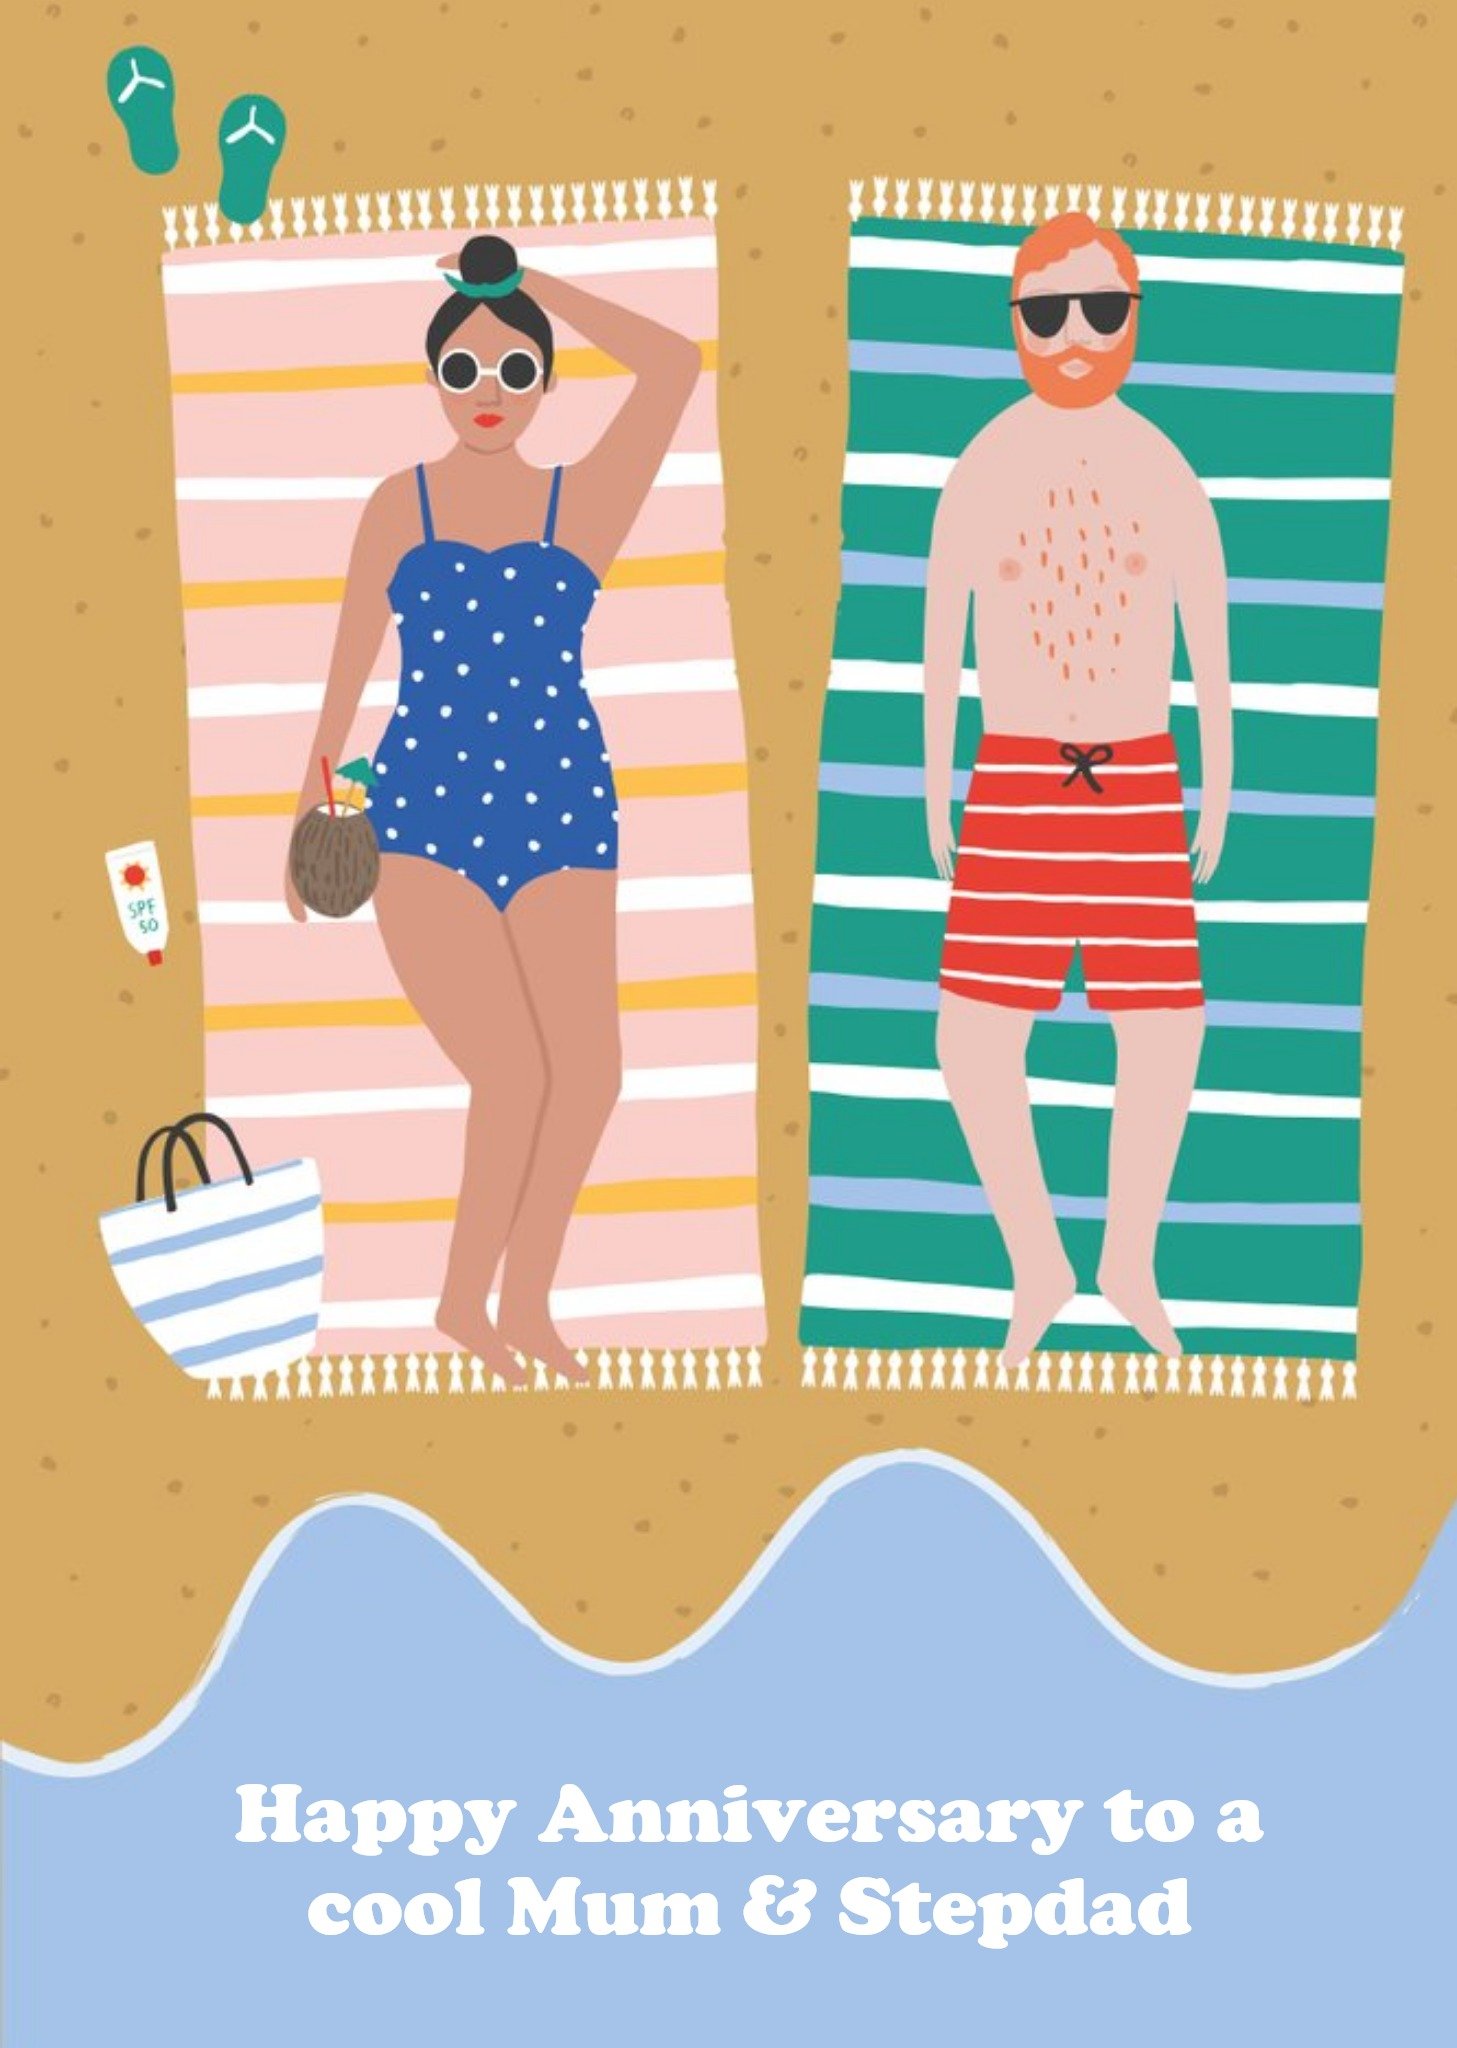 Moonpig Illustration Of A Couple Relaxing On A Beach Anniversary Card, Large